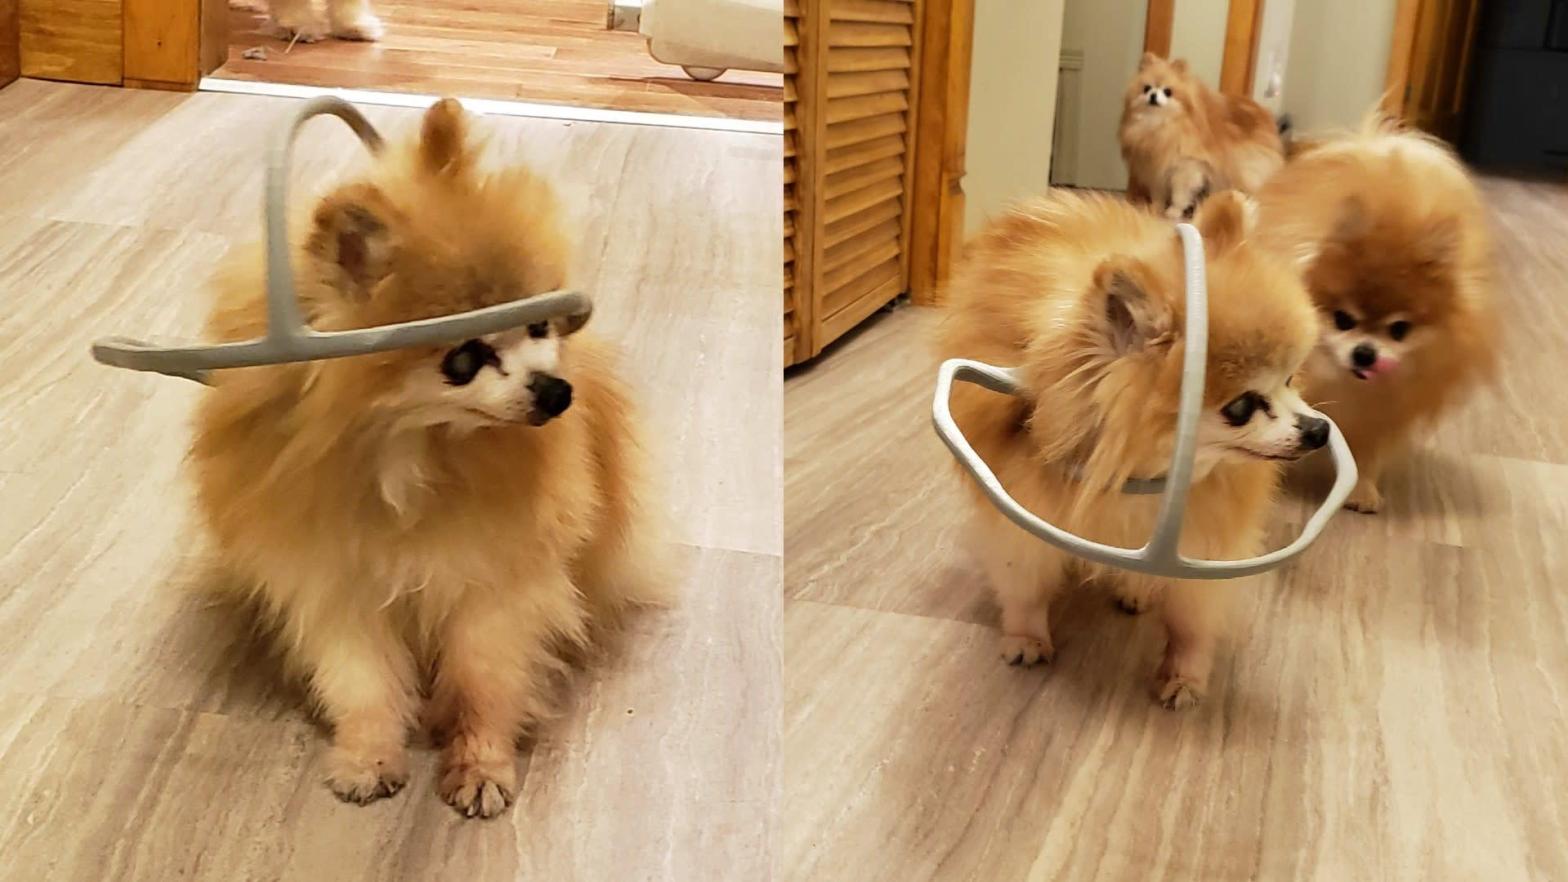 Sienna, a Pomeranian who is old enough to vote and weighs just 2 lbs (0.9 kg), is pictured wearing a 3D-printed safety hoop made by her owner, Chad Lalande. The device attaches to her harness and keeps her from banging into walls, but definitely took some getting used to, he said.  (Photo: Chad Lalande)